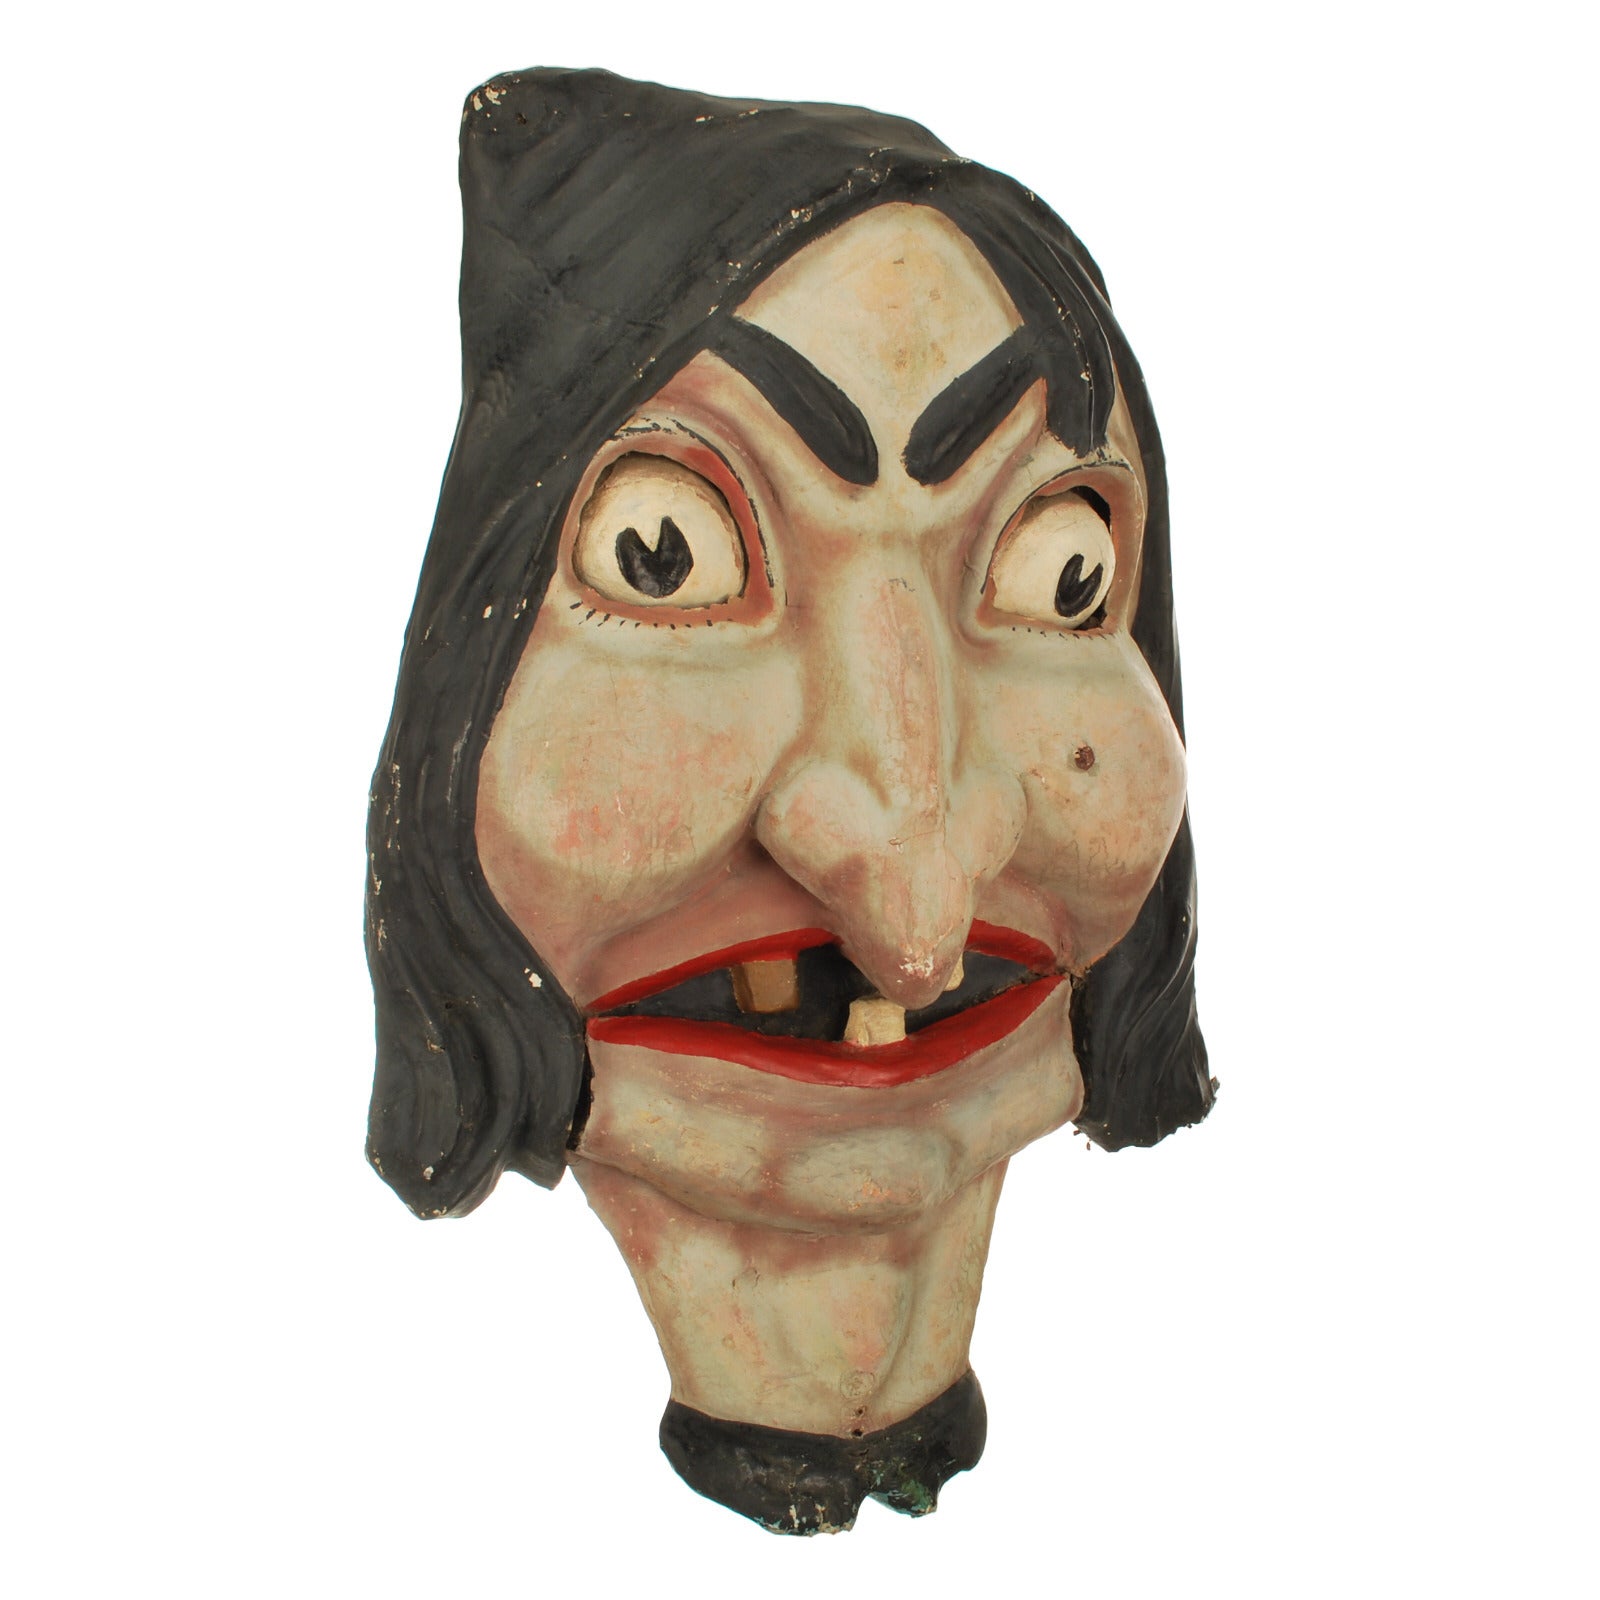 Mechanical Papier-Mâché Witches Head from Carnival Haunted House